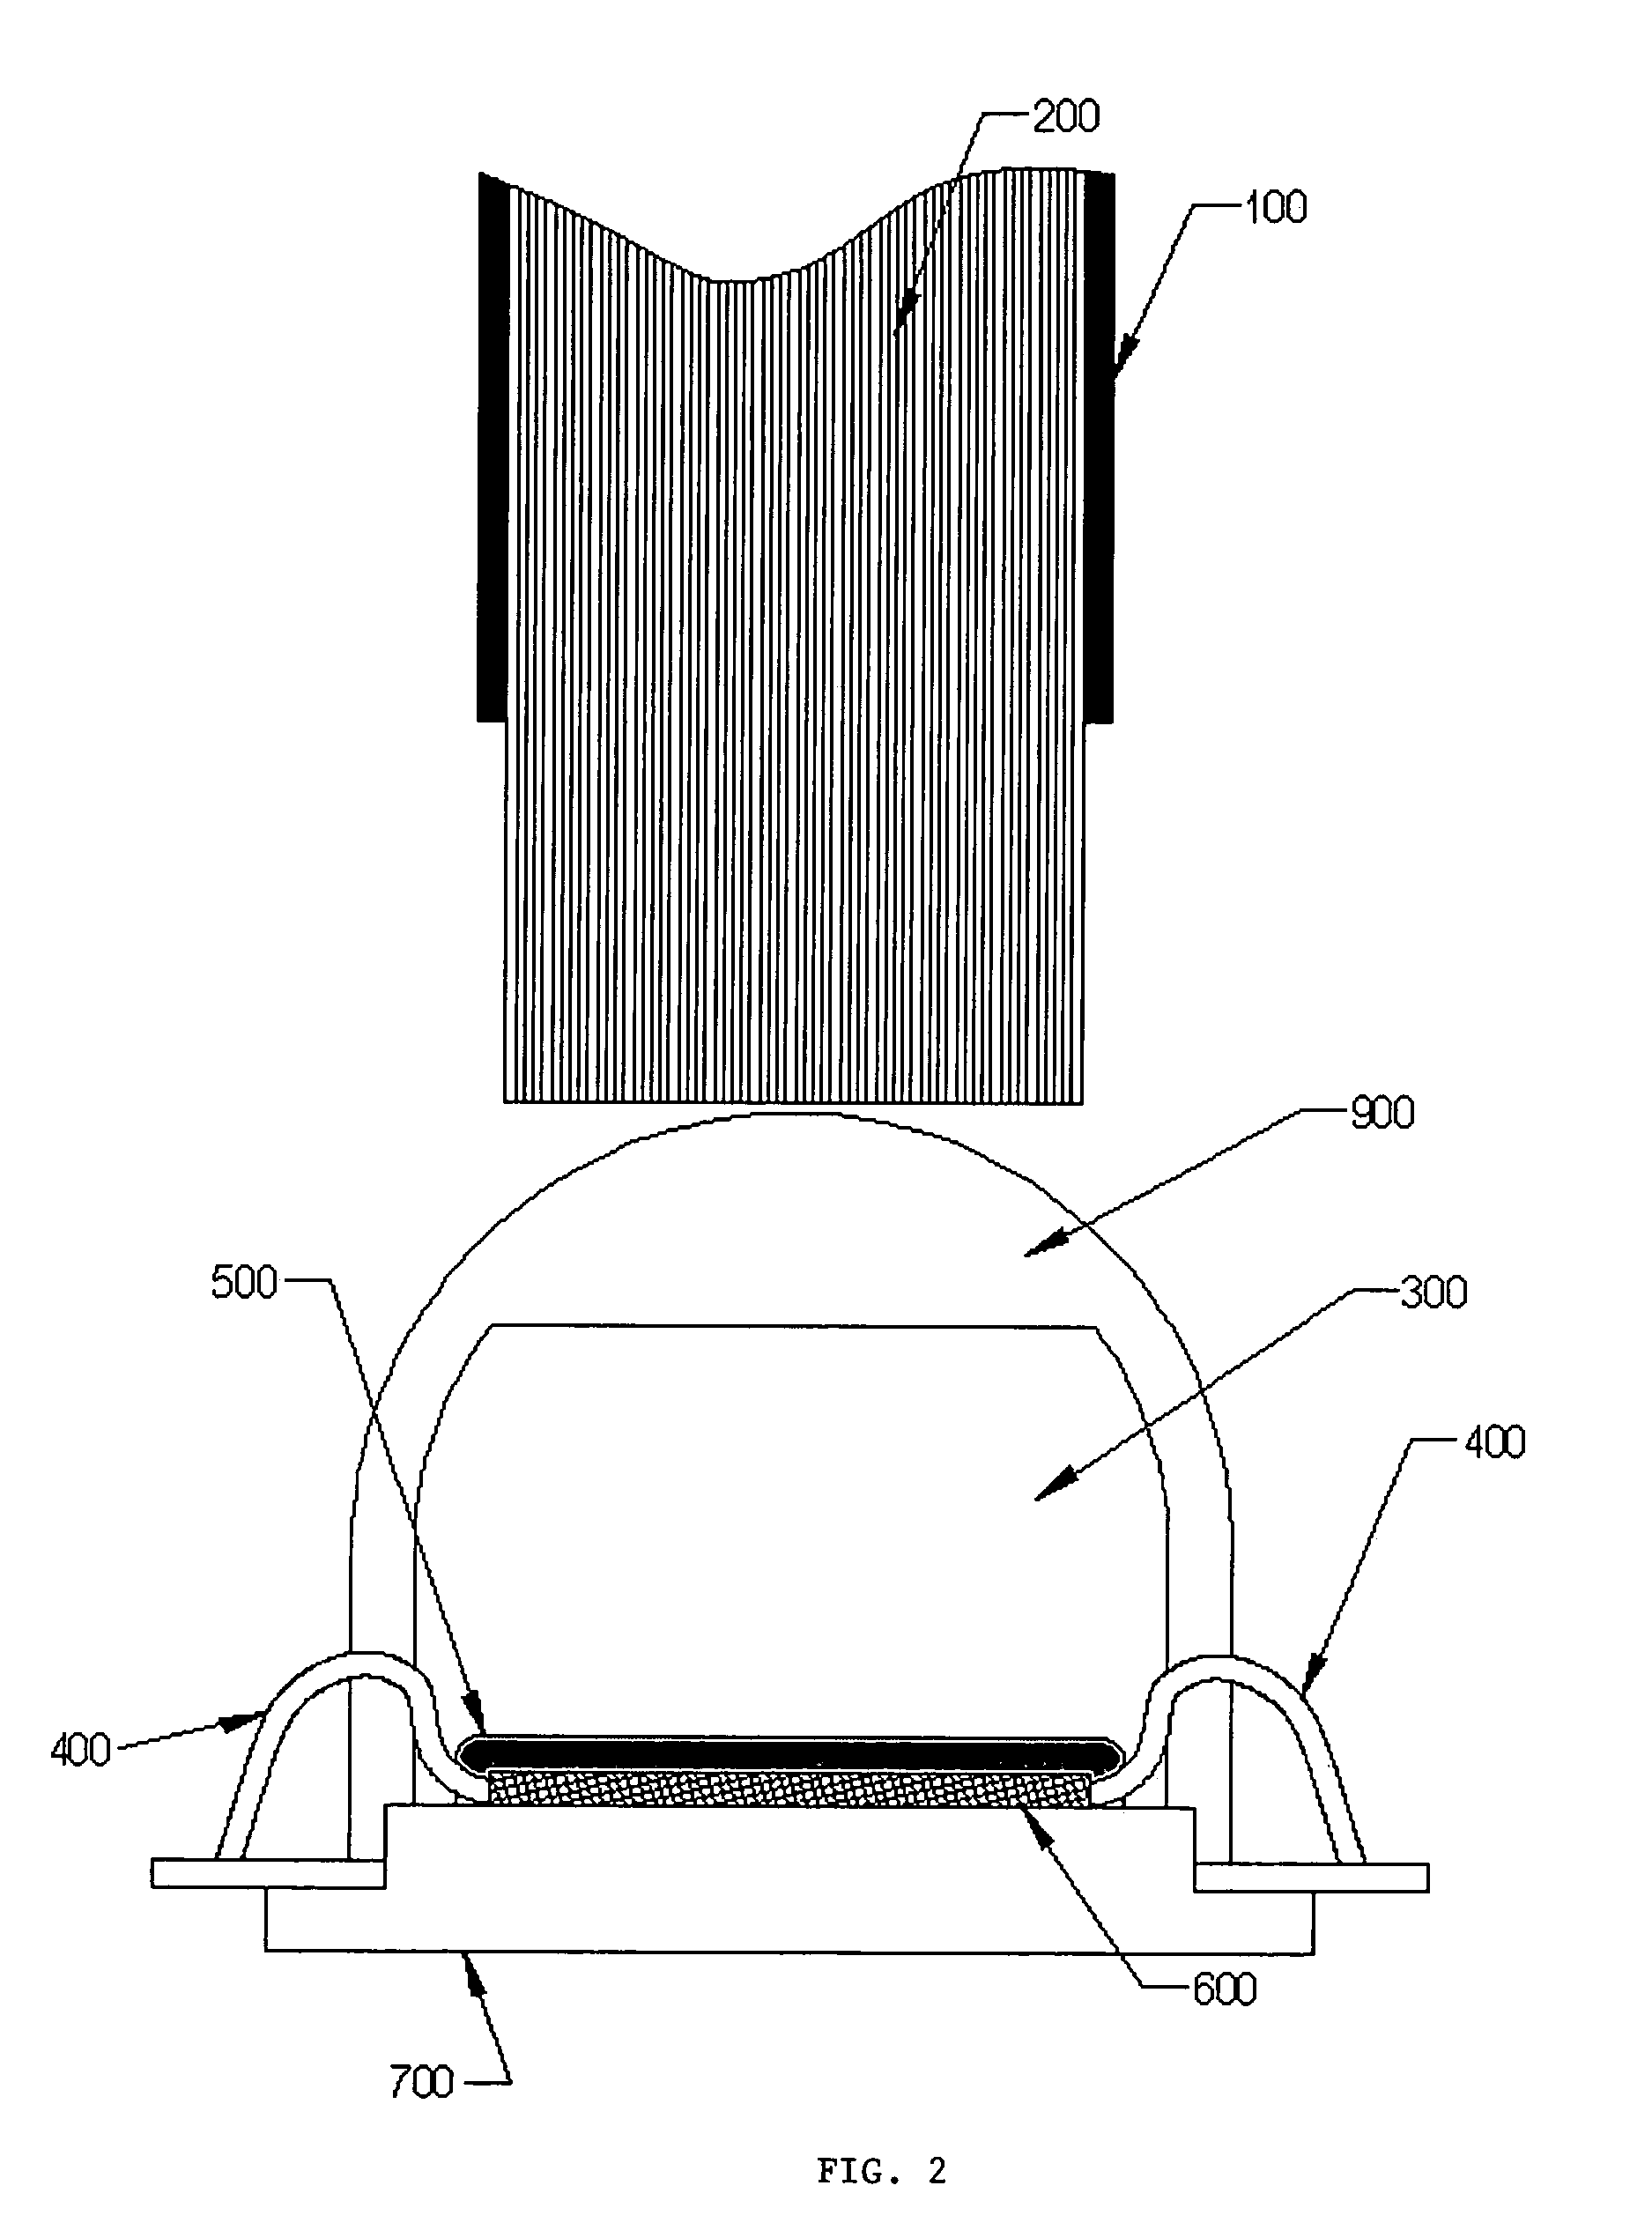 Compact, high-efficiency, high-power solid state light source using a single solid state light-emitting device